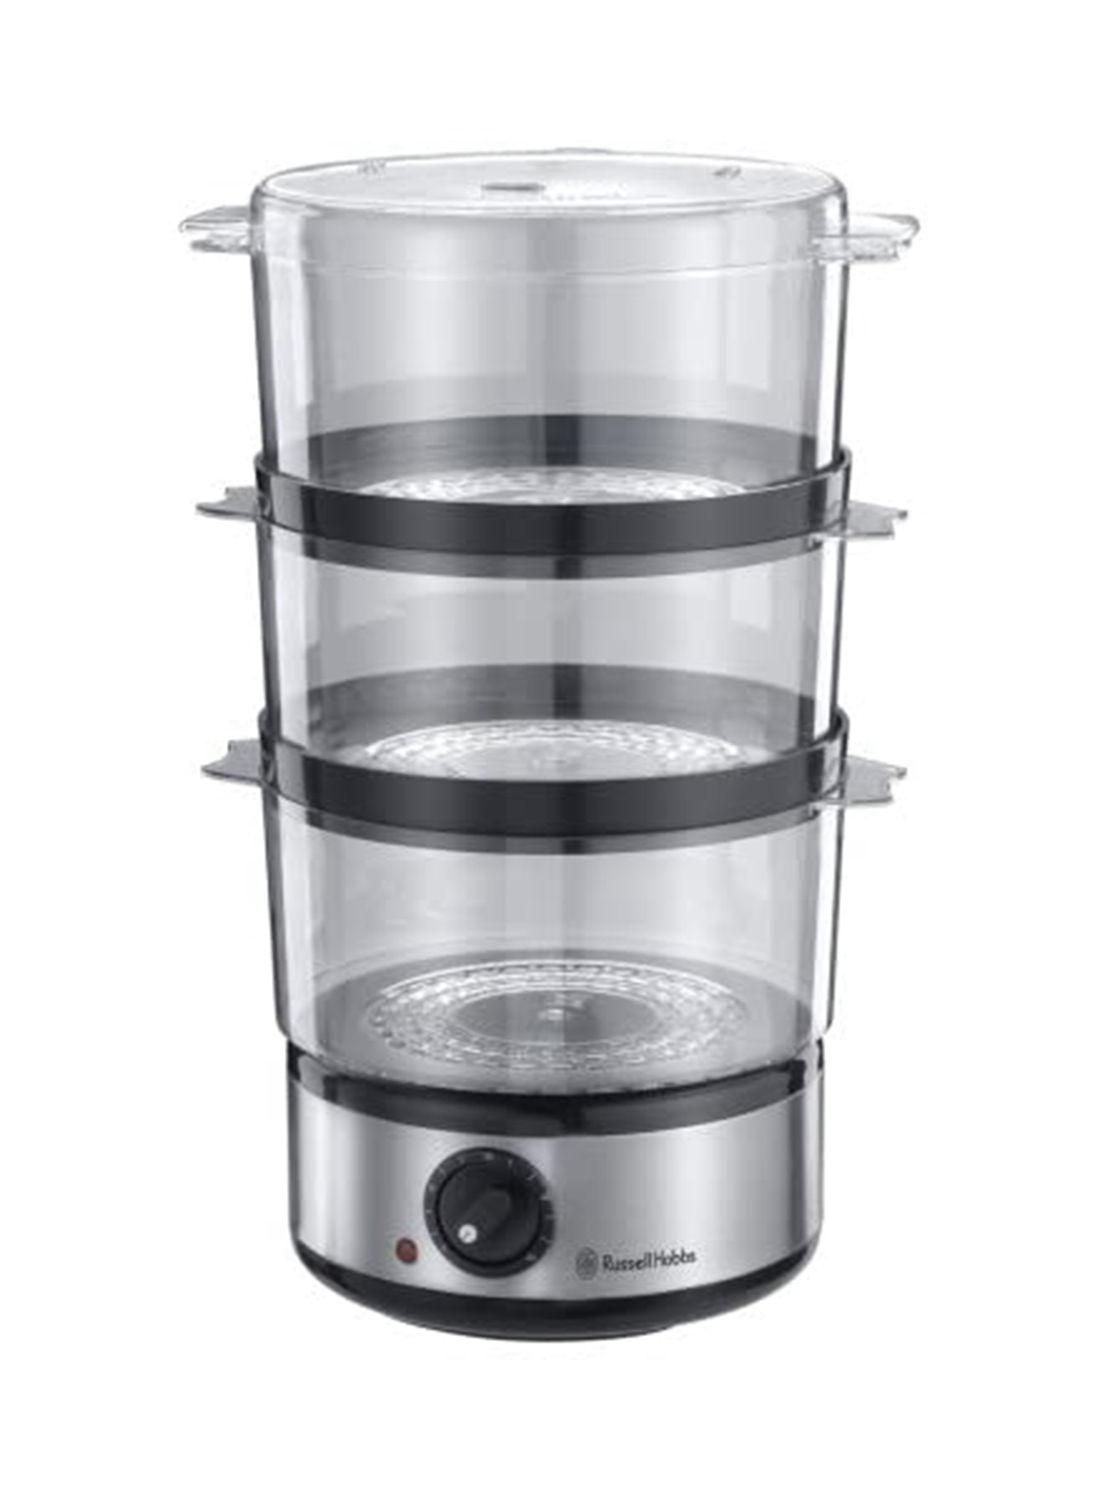 Russell Hobbs 3 Tier Food Steamer 7 l 14453 Silver/Clear